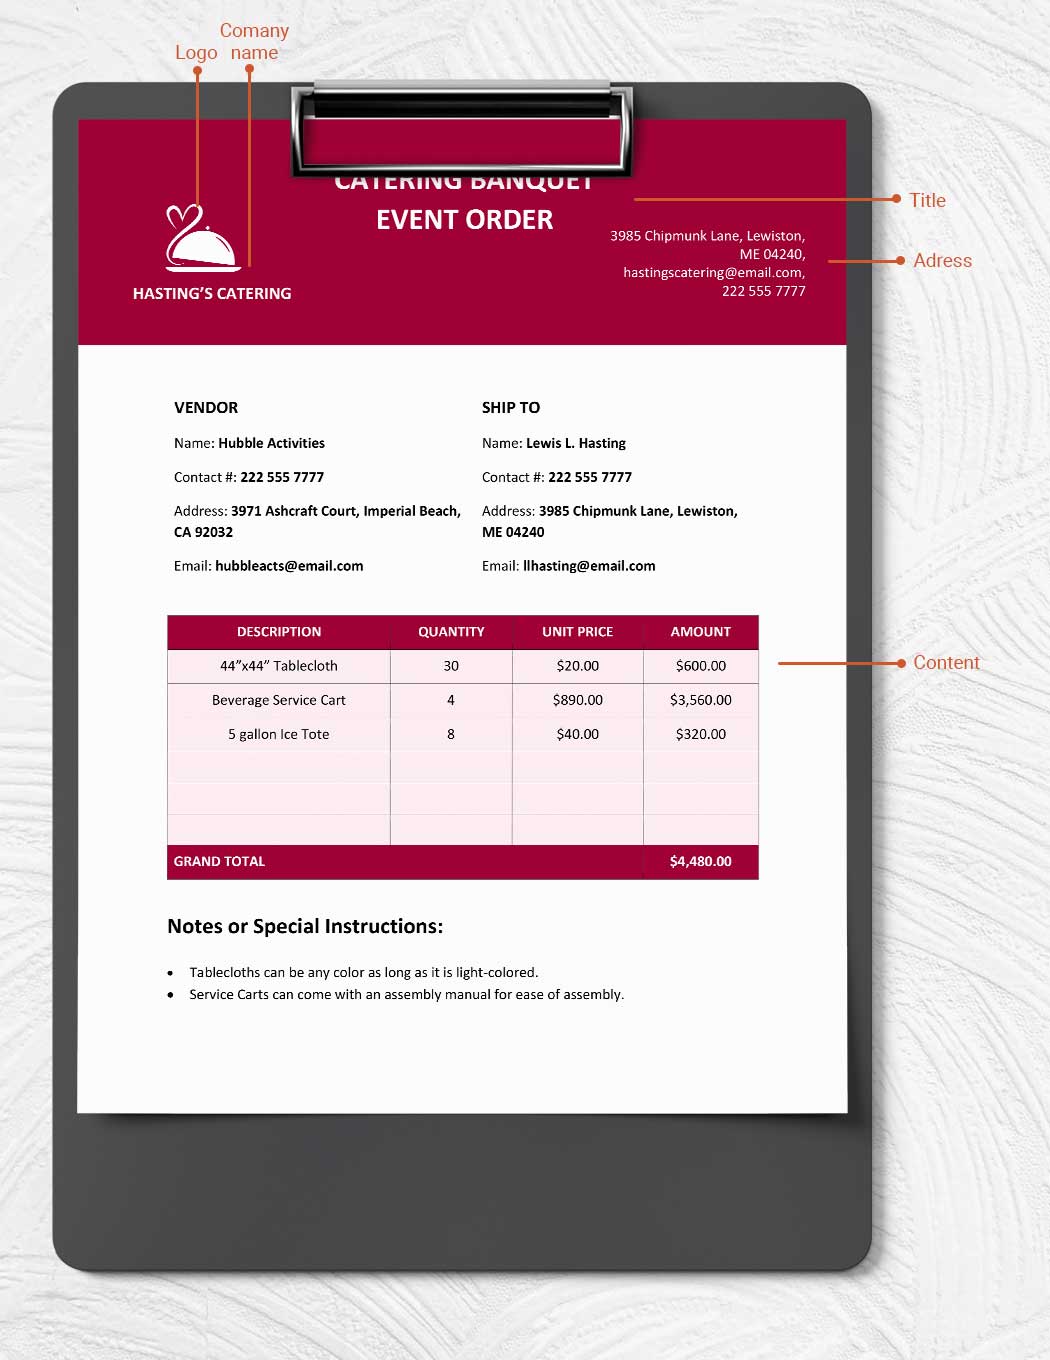 Catering Banquet Event Order Template Download in Word, Google Docs